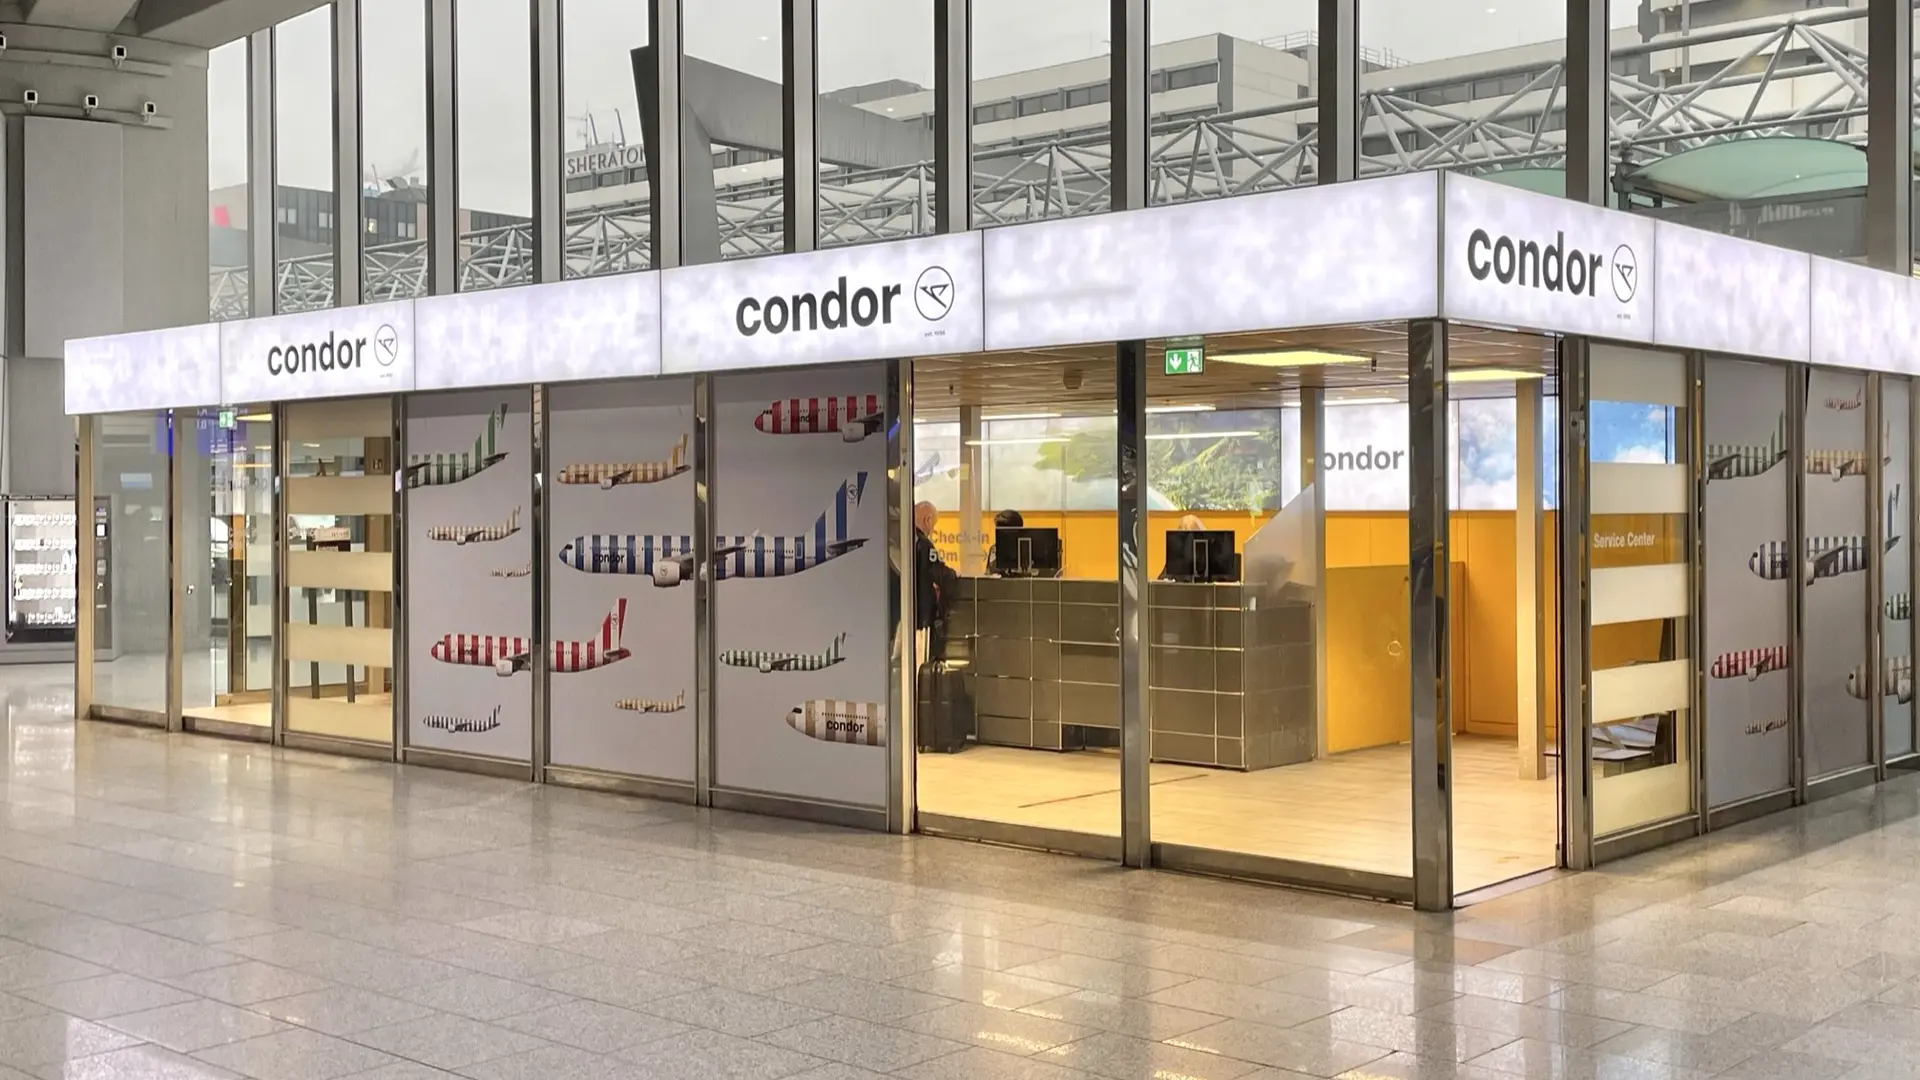 Airline review Airport experience - Condor - 0